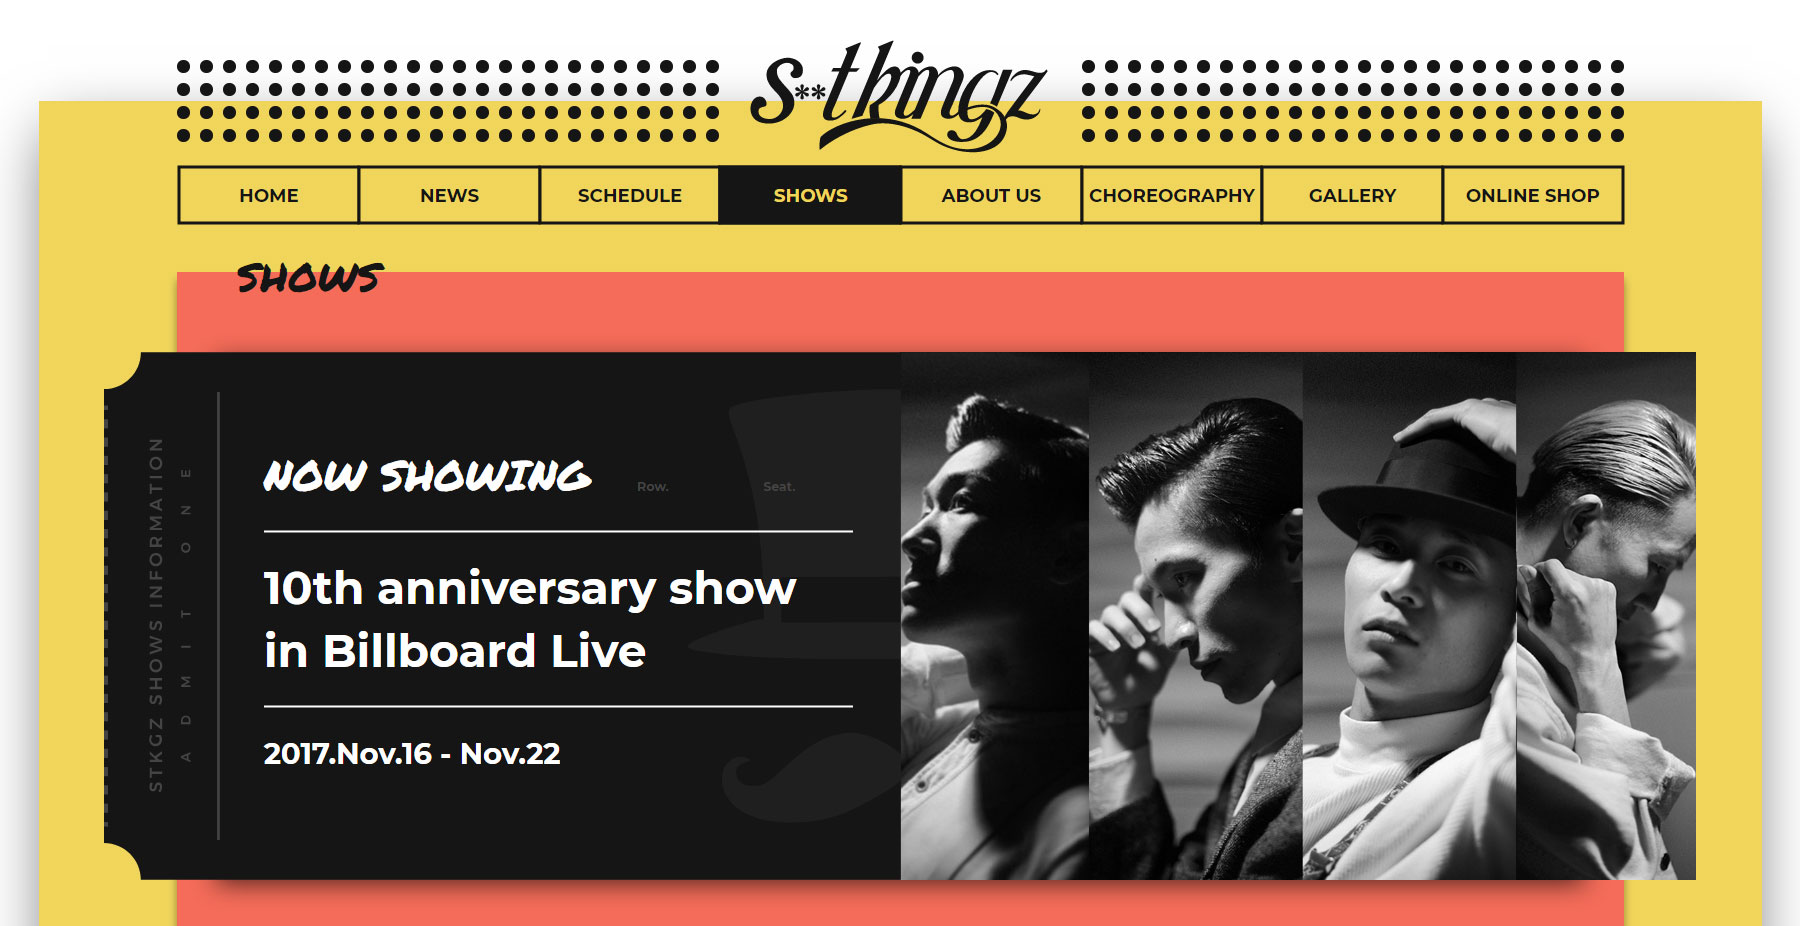 s**t kingz - Website of the Day